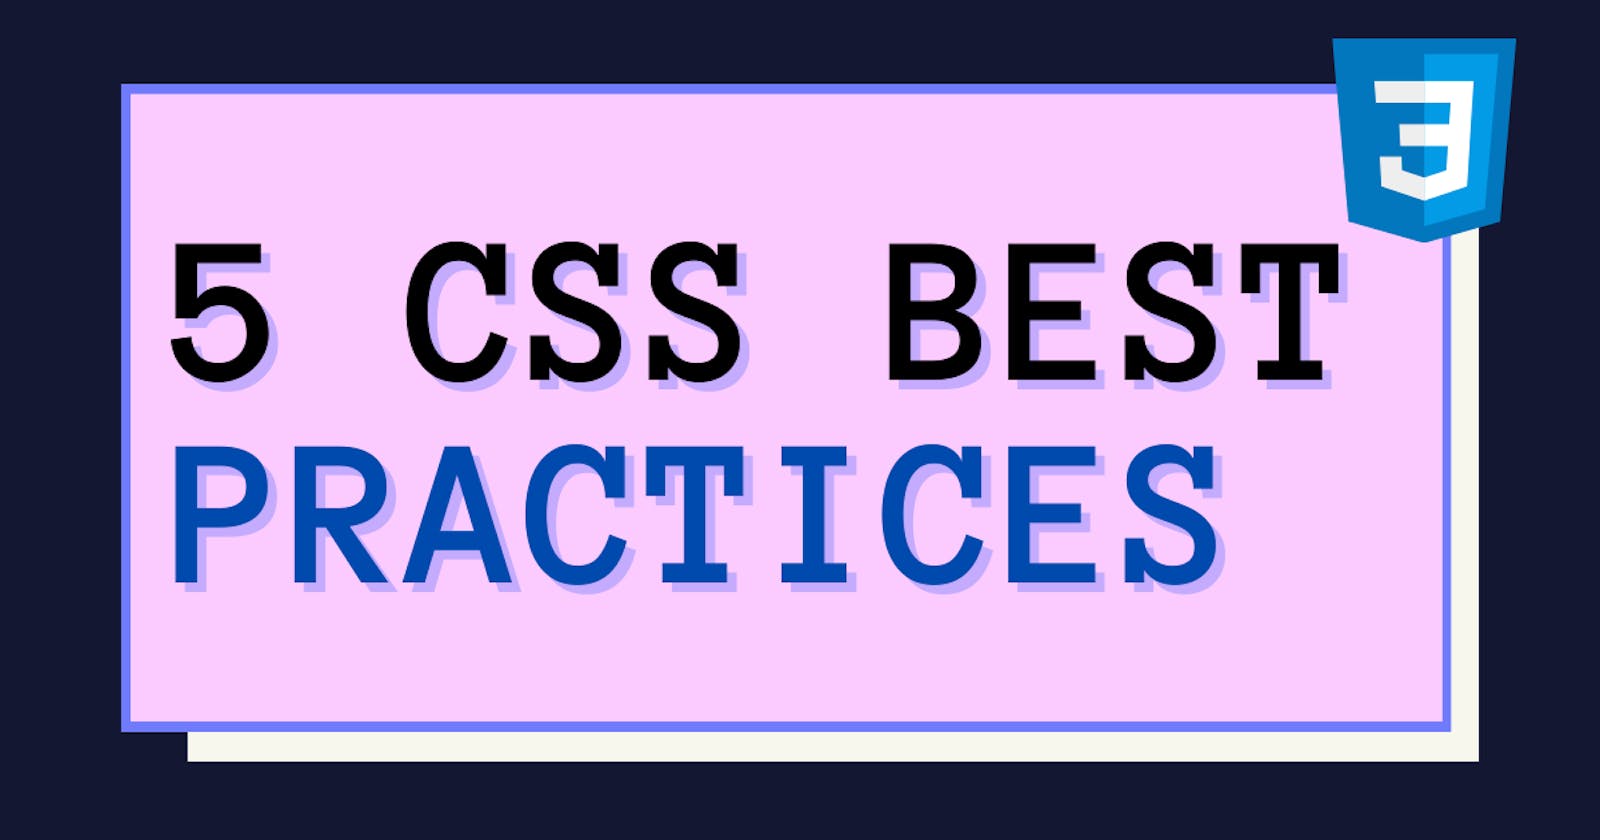 5 CSS Best Practices every front-end Developer should know